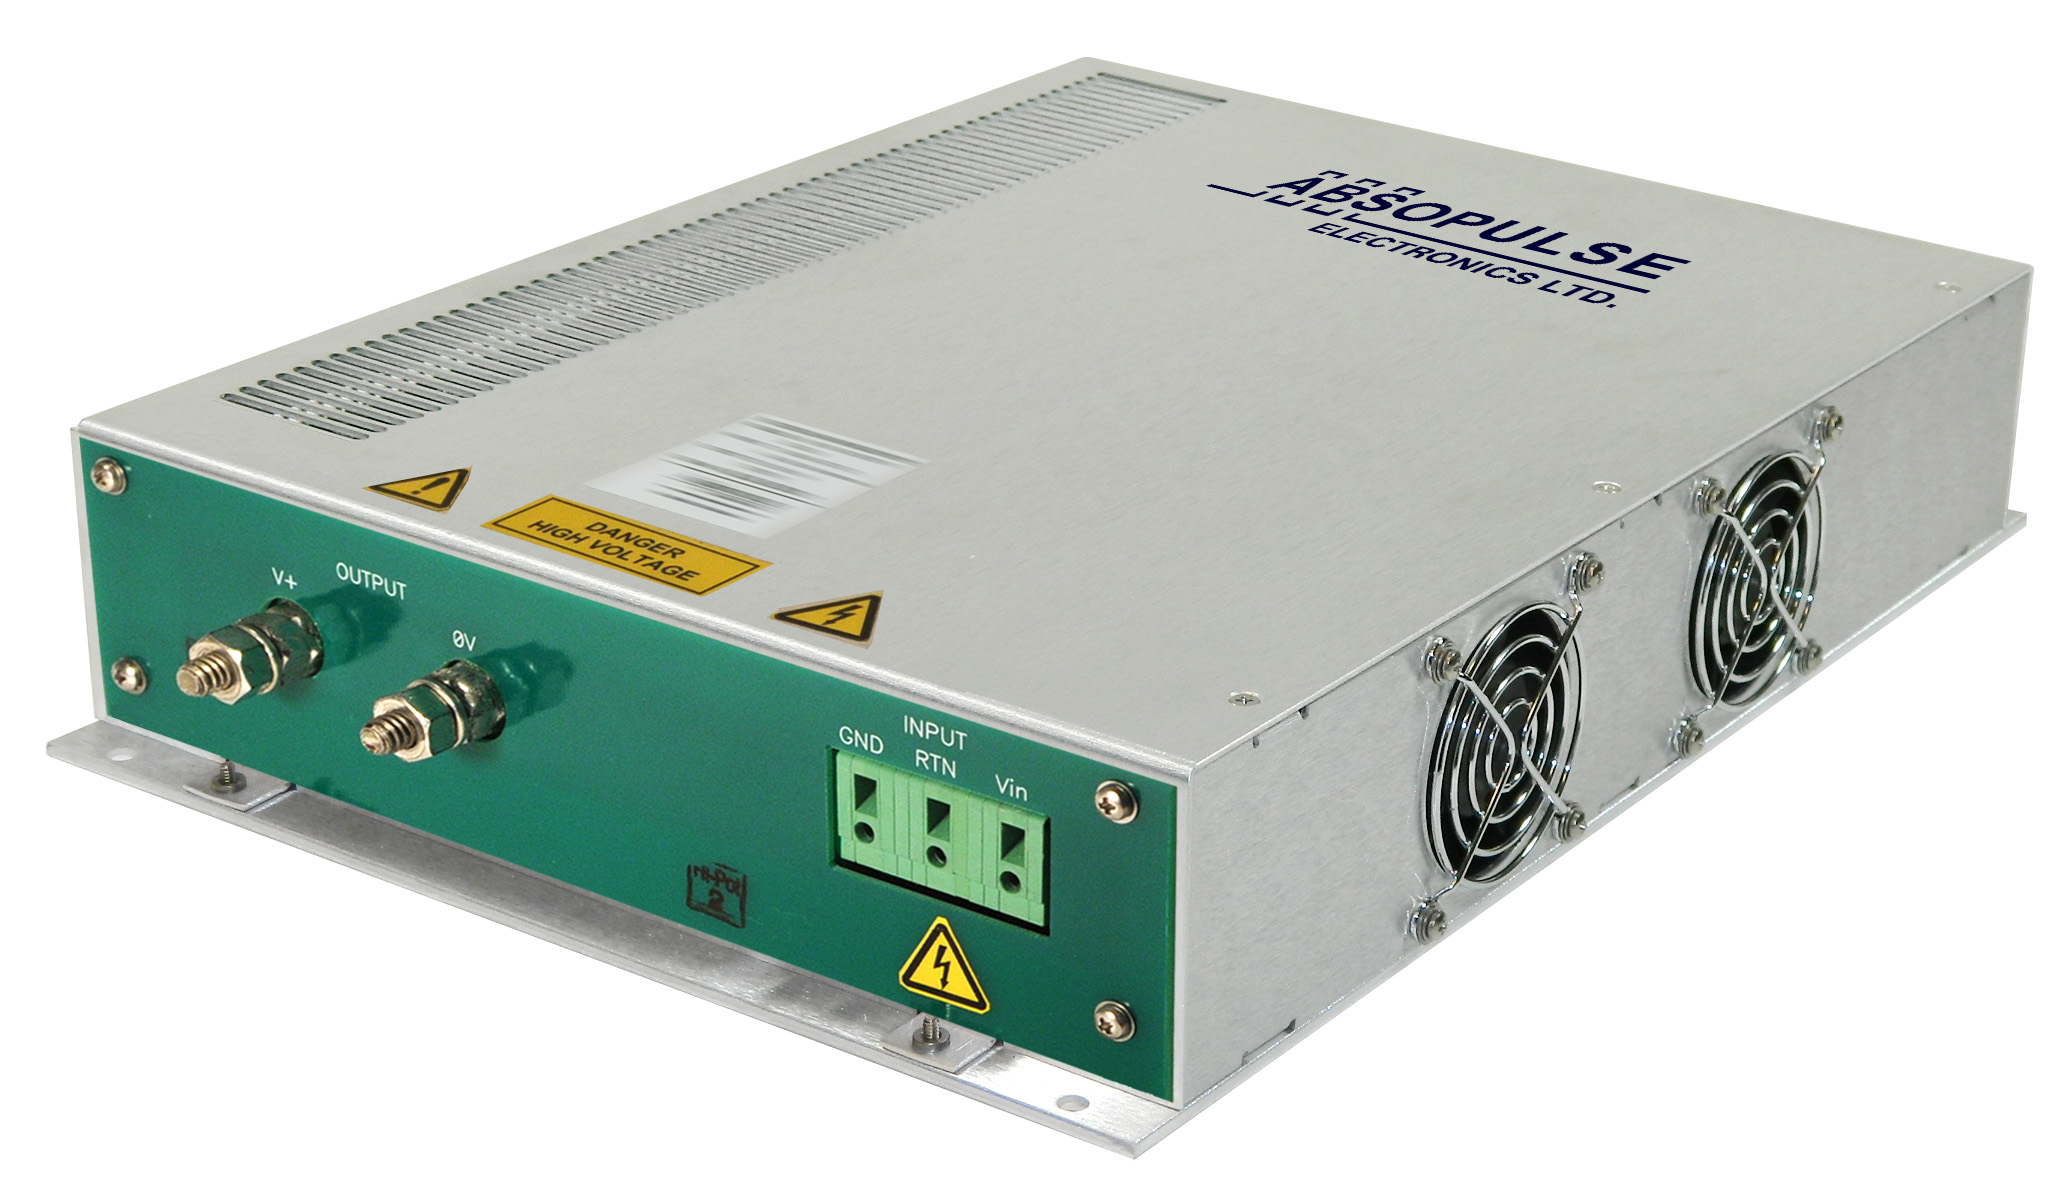 800Vdc Input Voltage DC-DC Converters Deliver up to 2000W